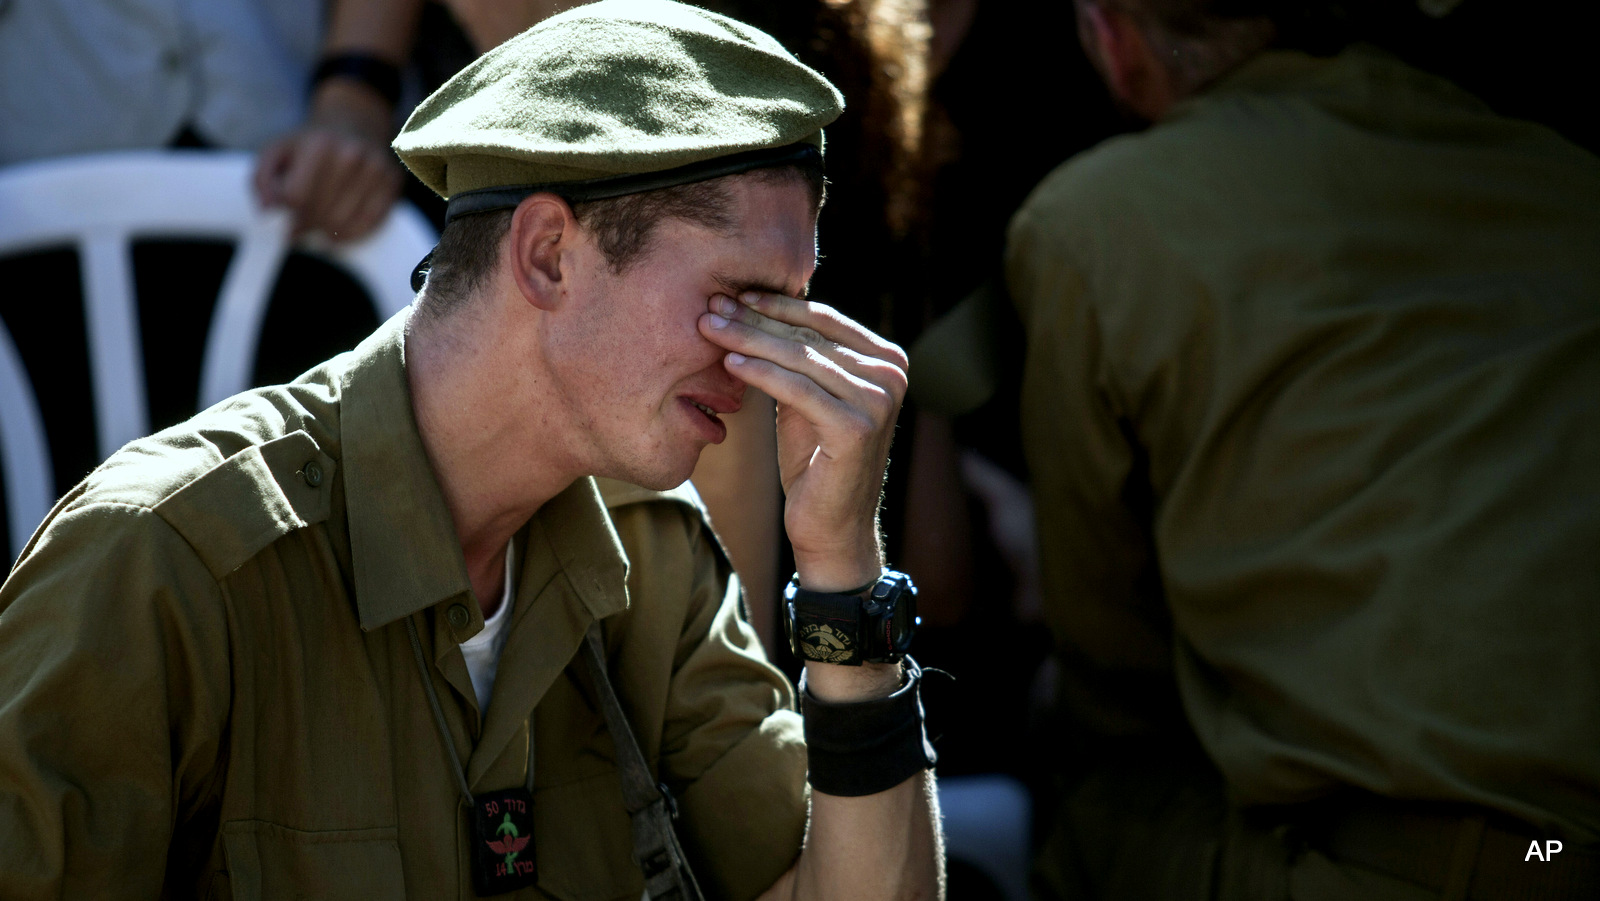 An Israeli soldier mourns over the grave of a soldier killed during Israeli last assault on the Gaza Strip, during his funeral at the military cemetery in Rehovot, Israel, Friday, July 25, 2014. 